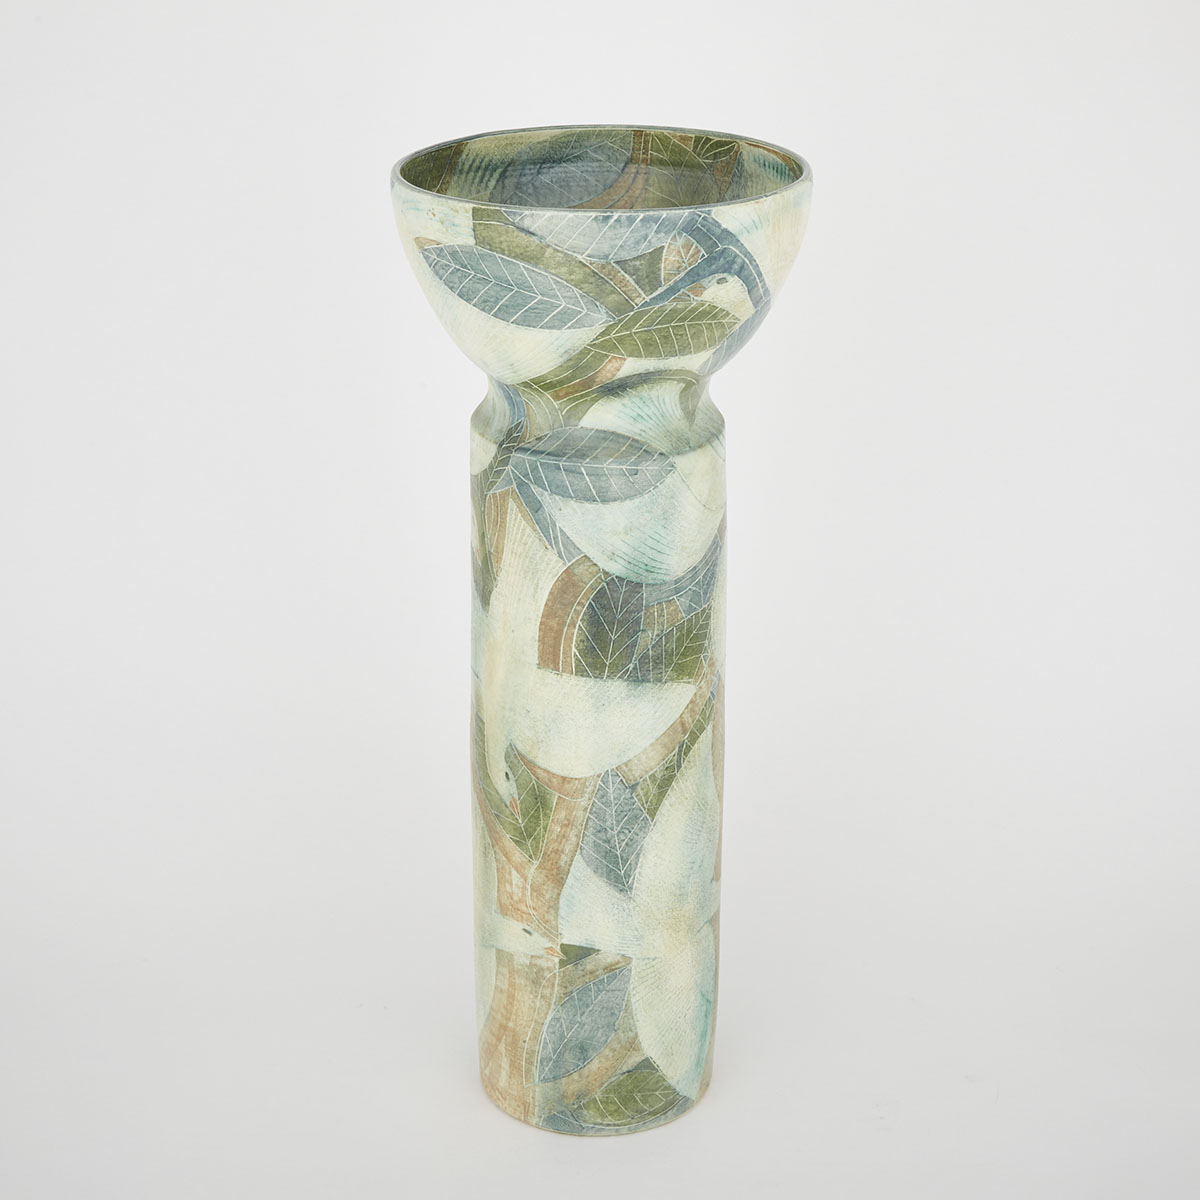 Brooklin Pottery Large Vase, Theo and Susan Harlander, c.1980